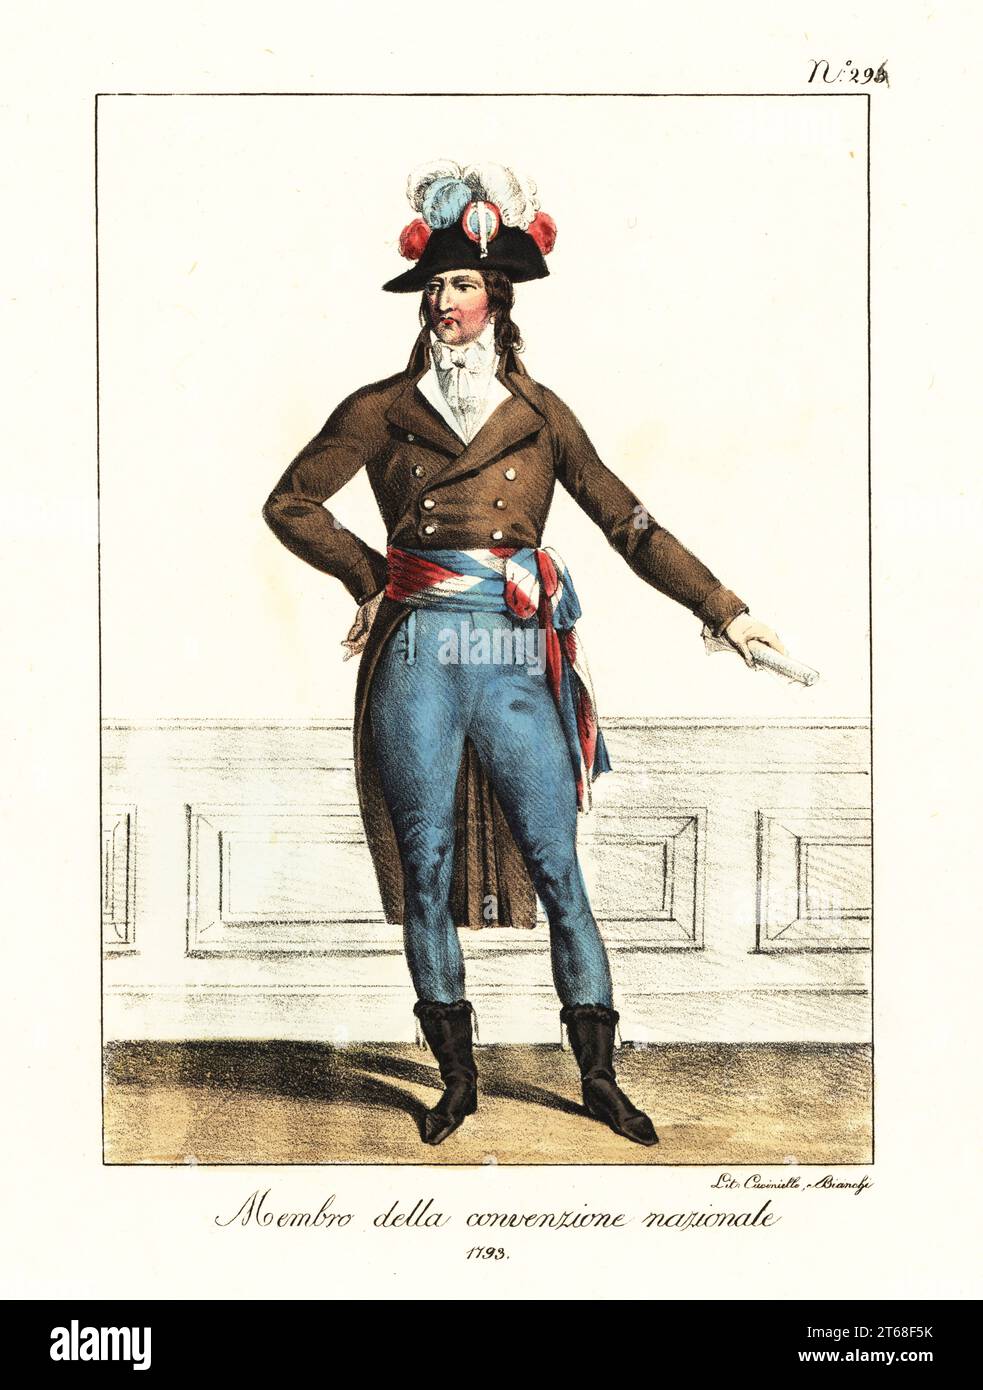 Costume of a Member of the National Convention, French Revolutionary era, 1793. In bicorne with tricolor plumes, brown coat, cravat, blue trousers, tricolor sash belt, calf-length boots. Membre de la Convention nationale. Handcoloured lithograph by Lorenzo Bianchi and Domenico Cuciniello after Hippolyte Lecomte from Costumi civili e militari della monarchia francese dal 1200 al 1820, Naples, 1825. Italian edition of Lecomtes Civilian and military costumes of the French monarchy from 1200 to 1820. Stock Photo